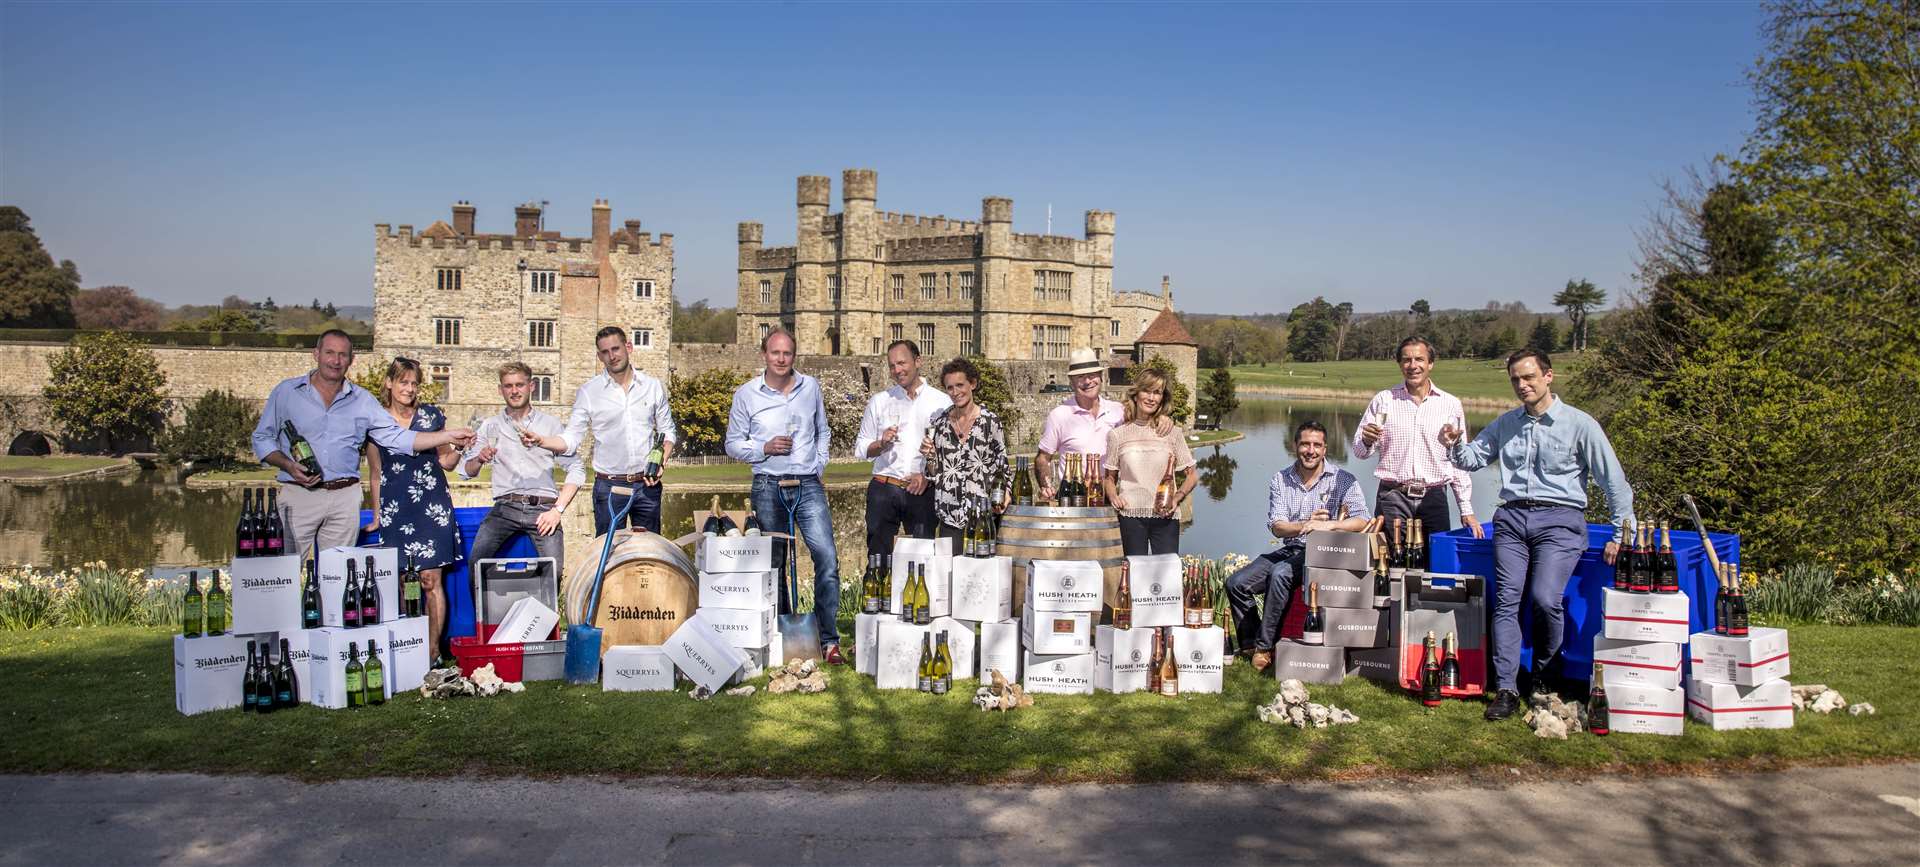 The wine garden of England tour launched last year